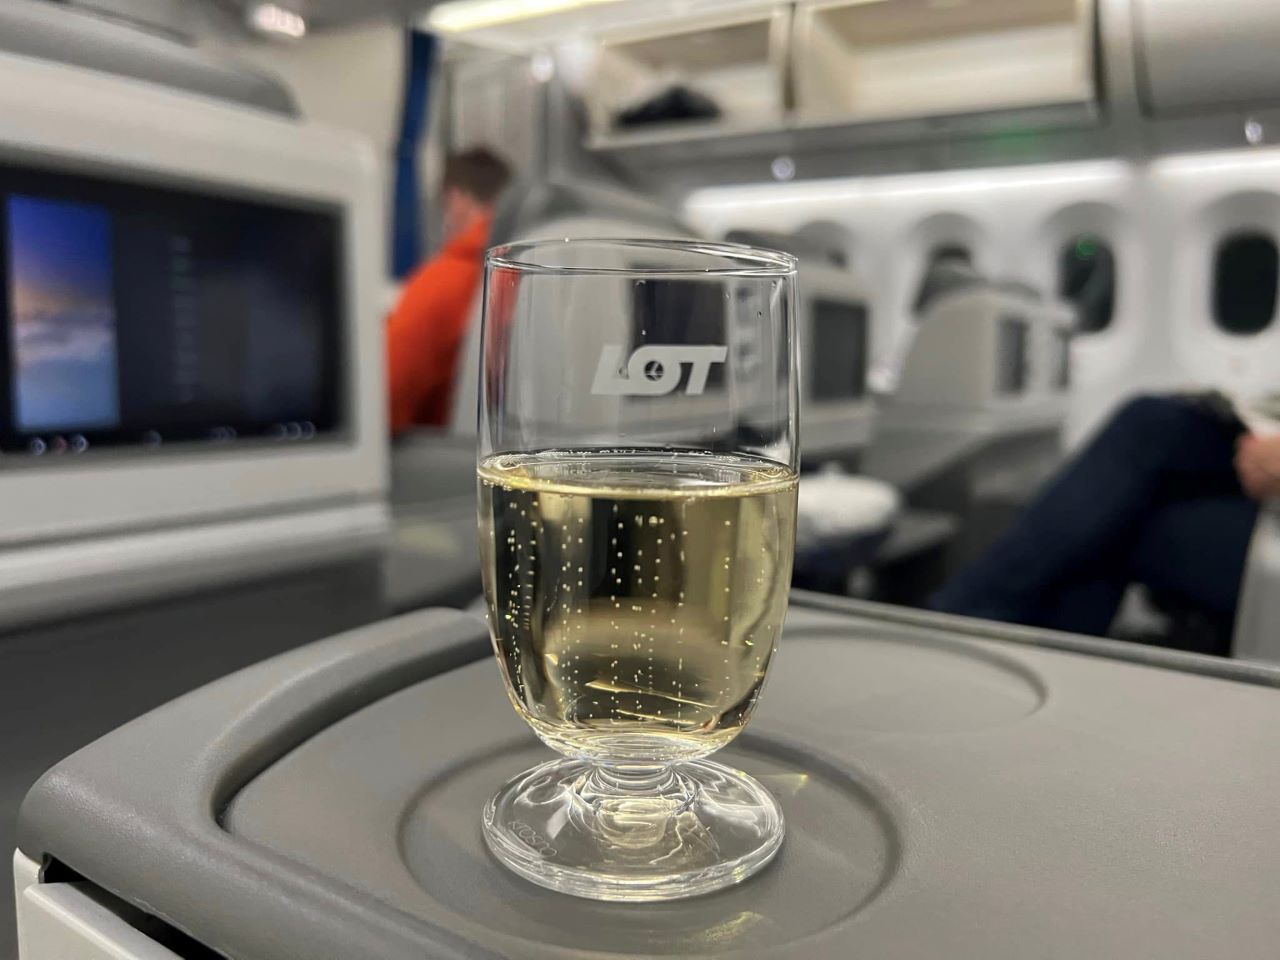 LOT Polish Airlines Business Class champagne 